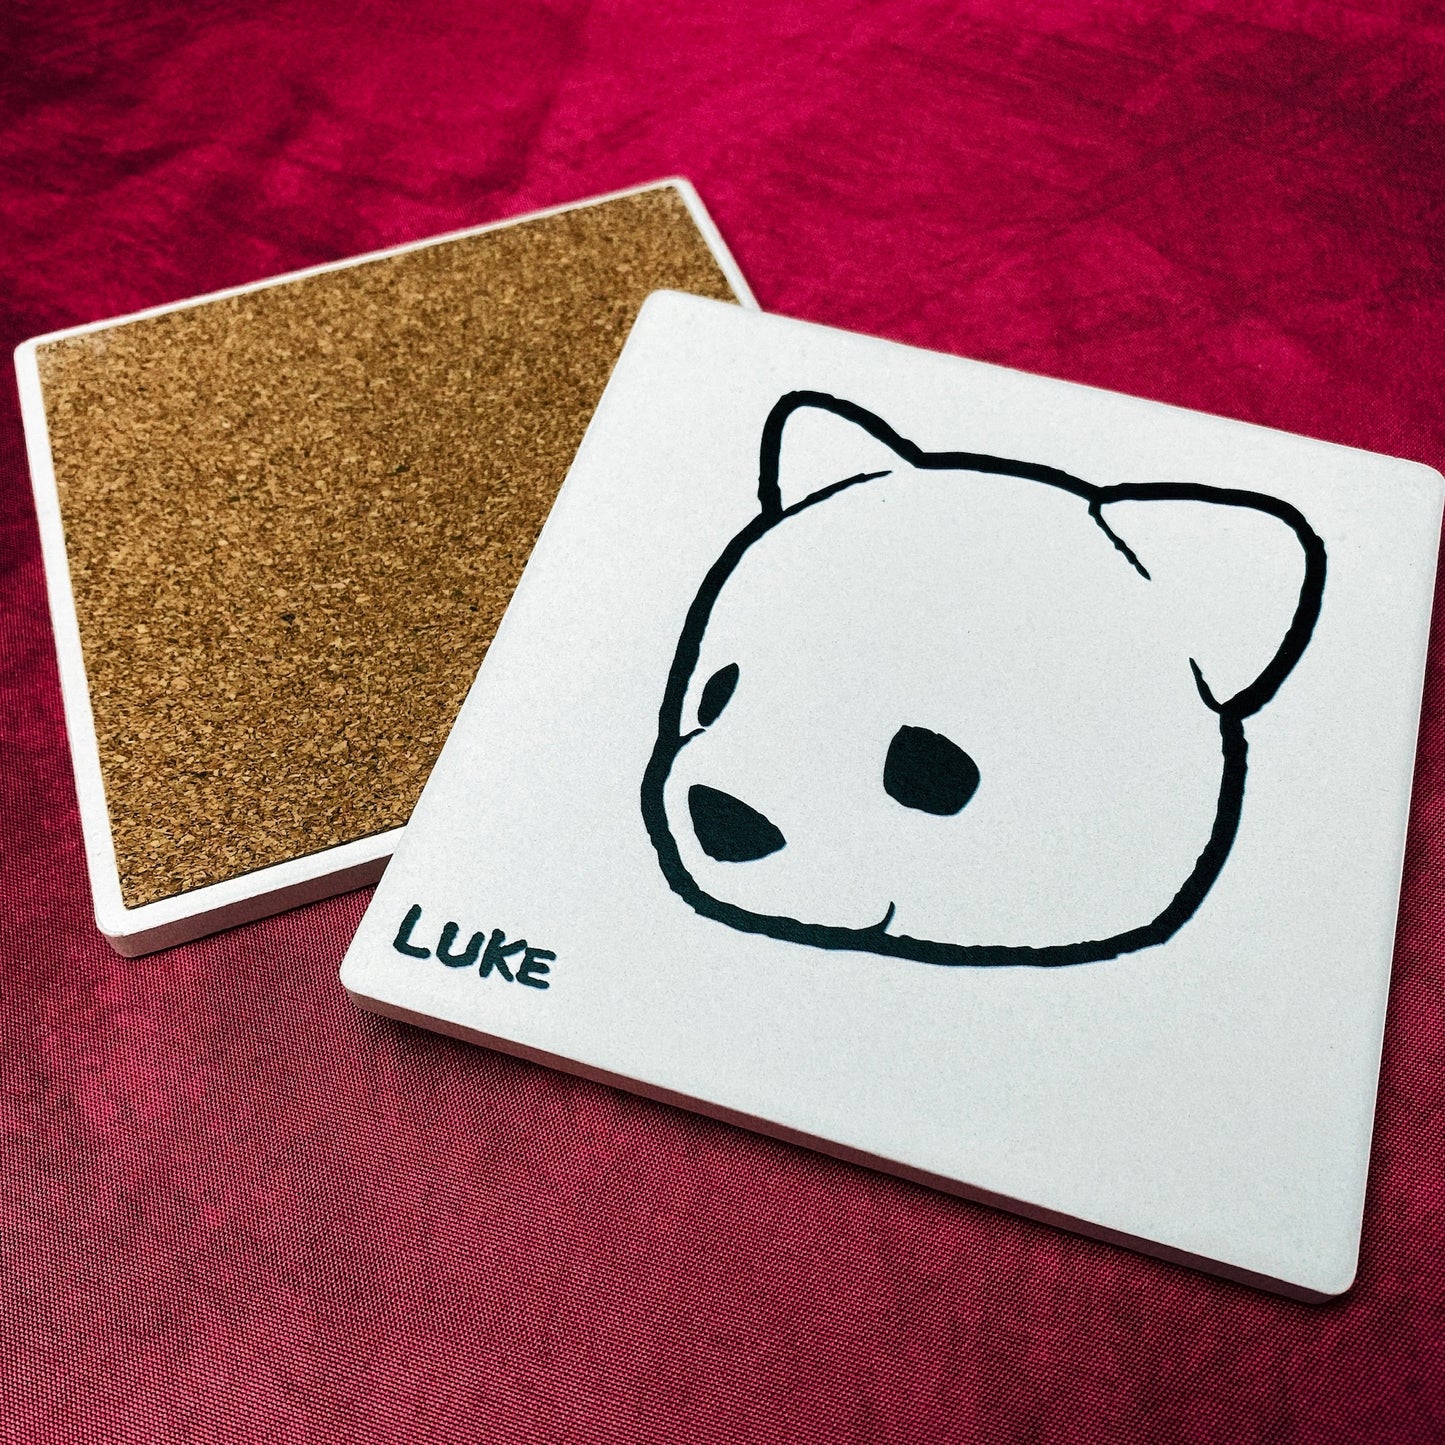 Ceramic coaster featuring Luke Chueh's bear head. Limited-edition of 100 published by Plush Art Club. Has a cork backing,